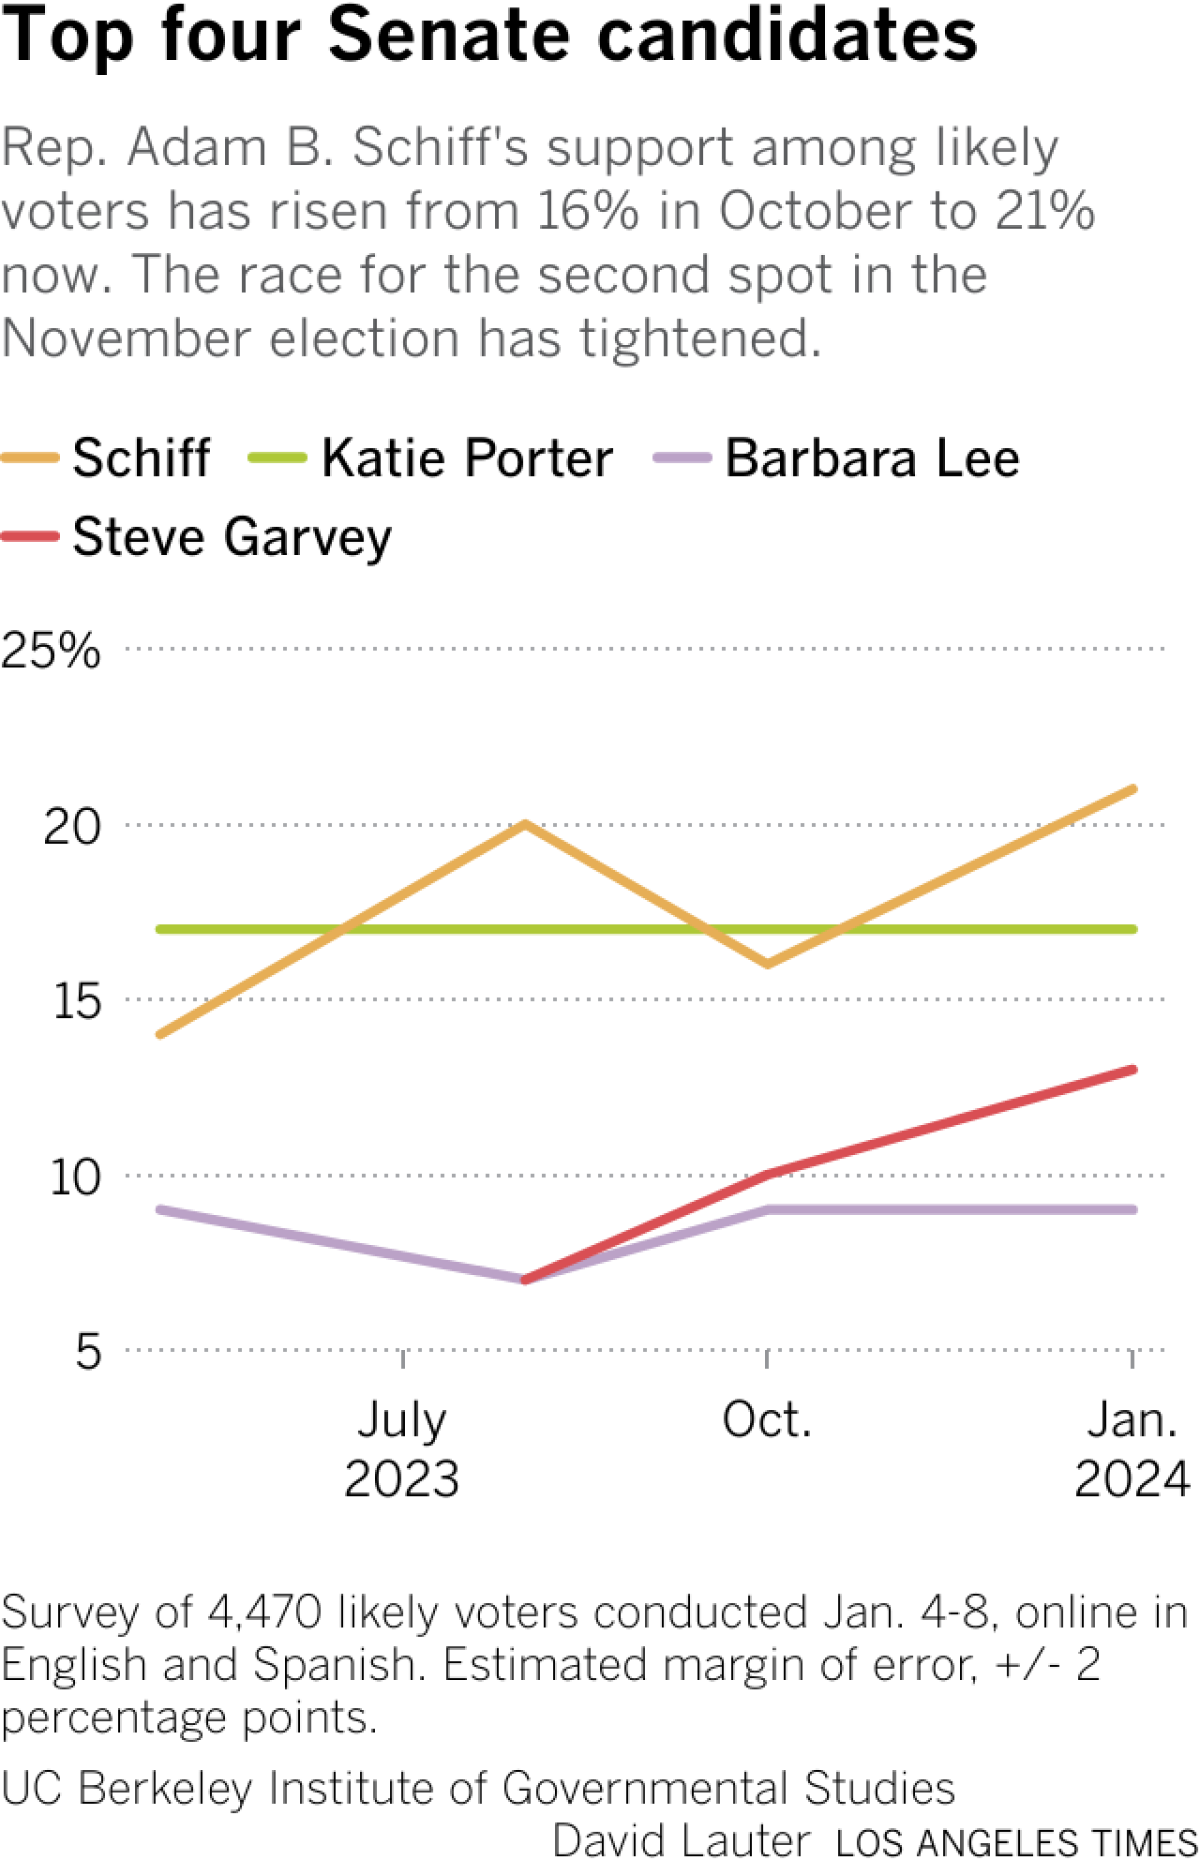 Rep. Adam B. Schiff's support among likely voters has risen from 16% in October to 21% now. The race for the second spot in the November election has tightened.